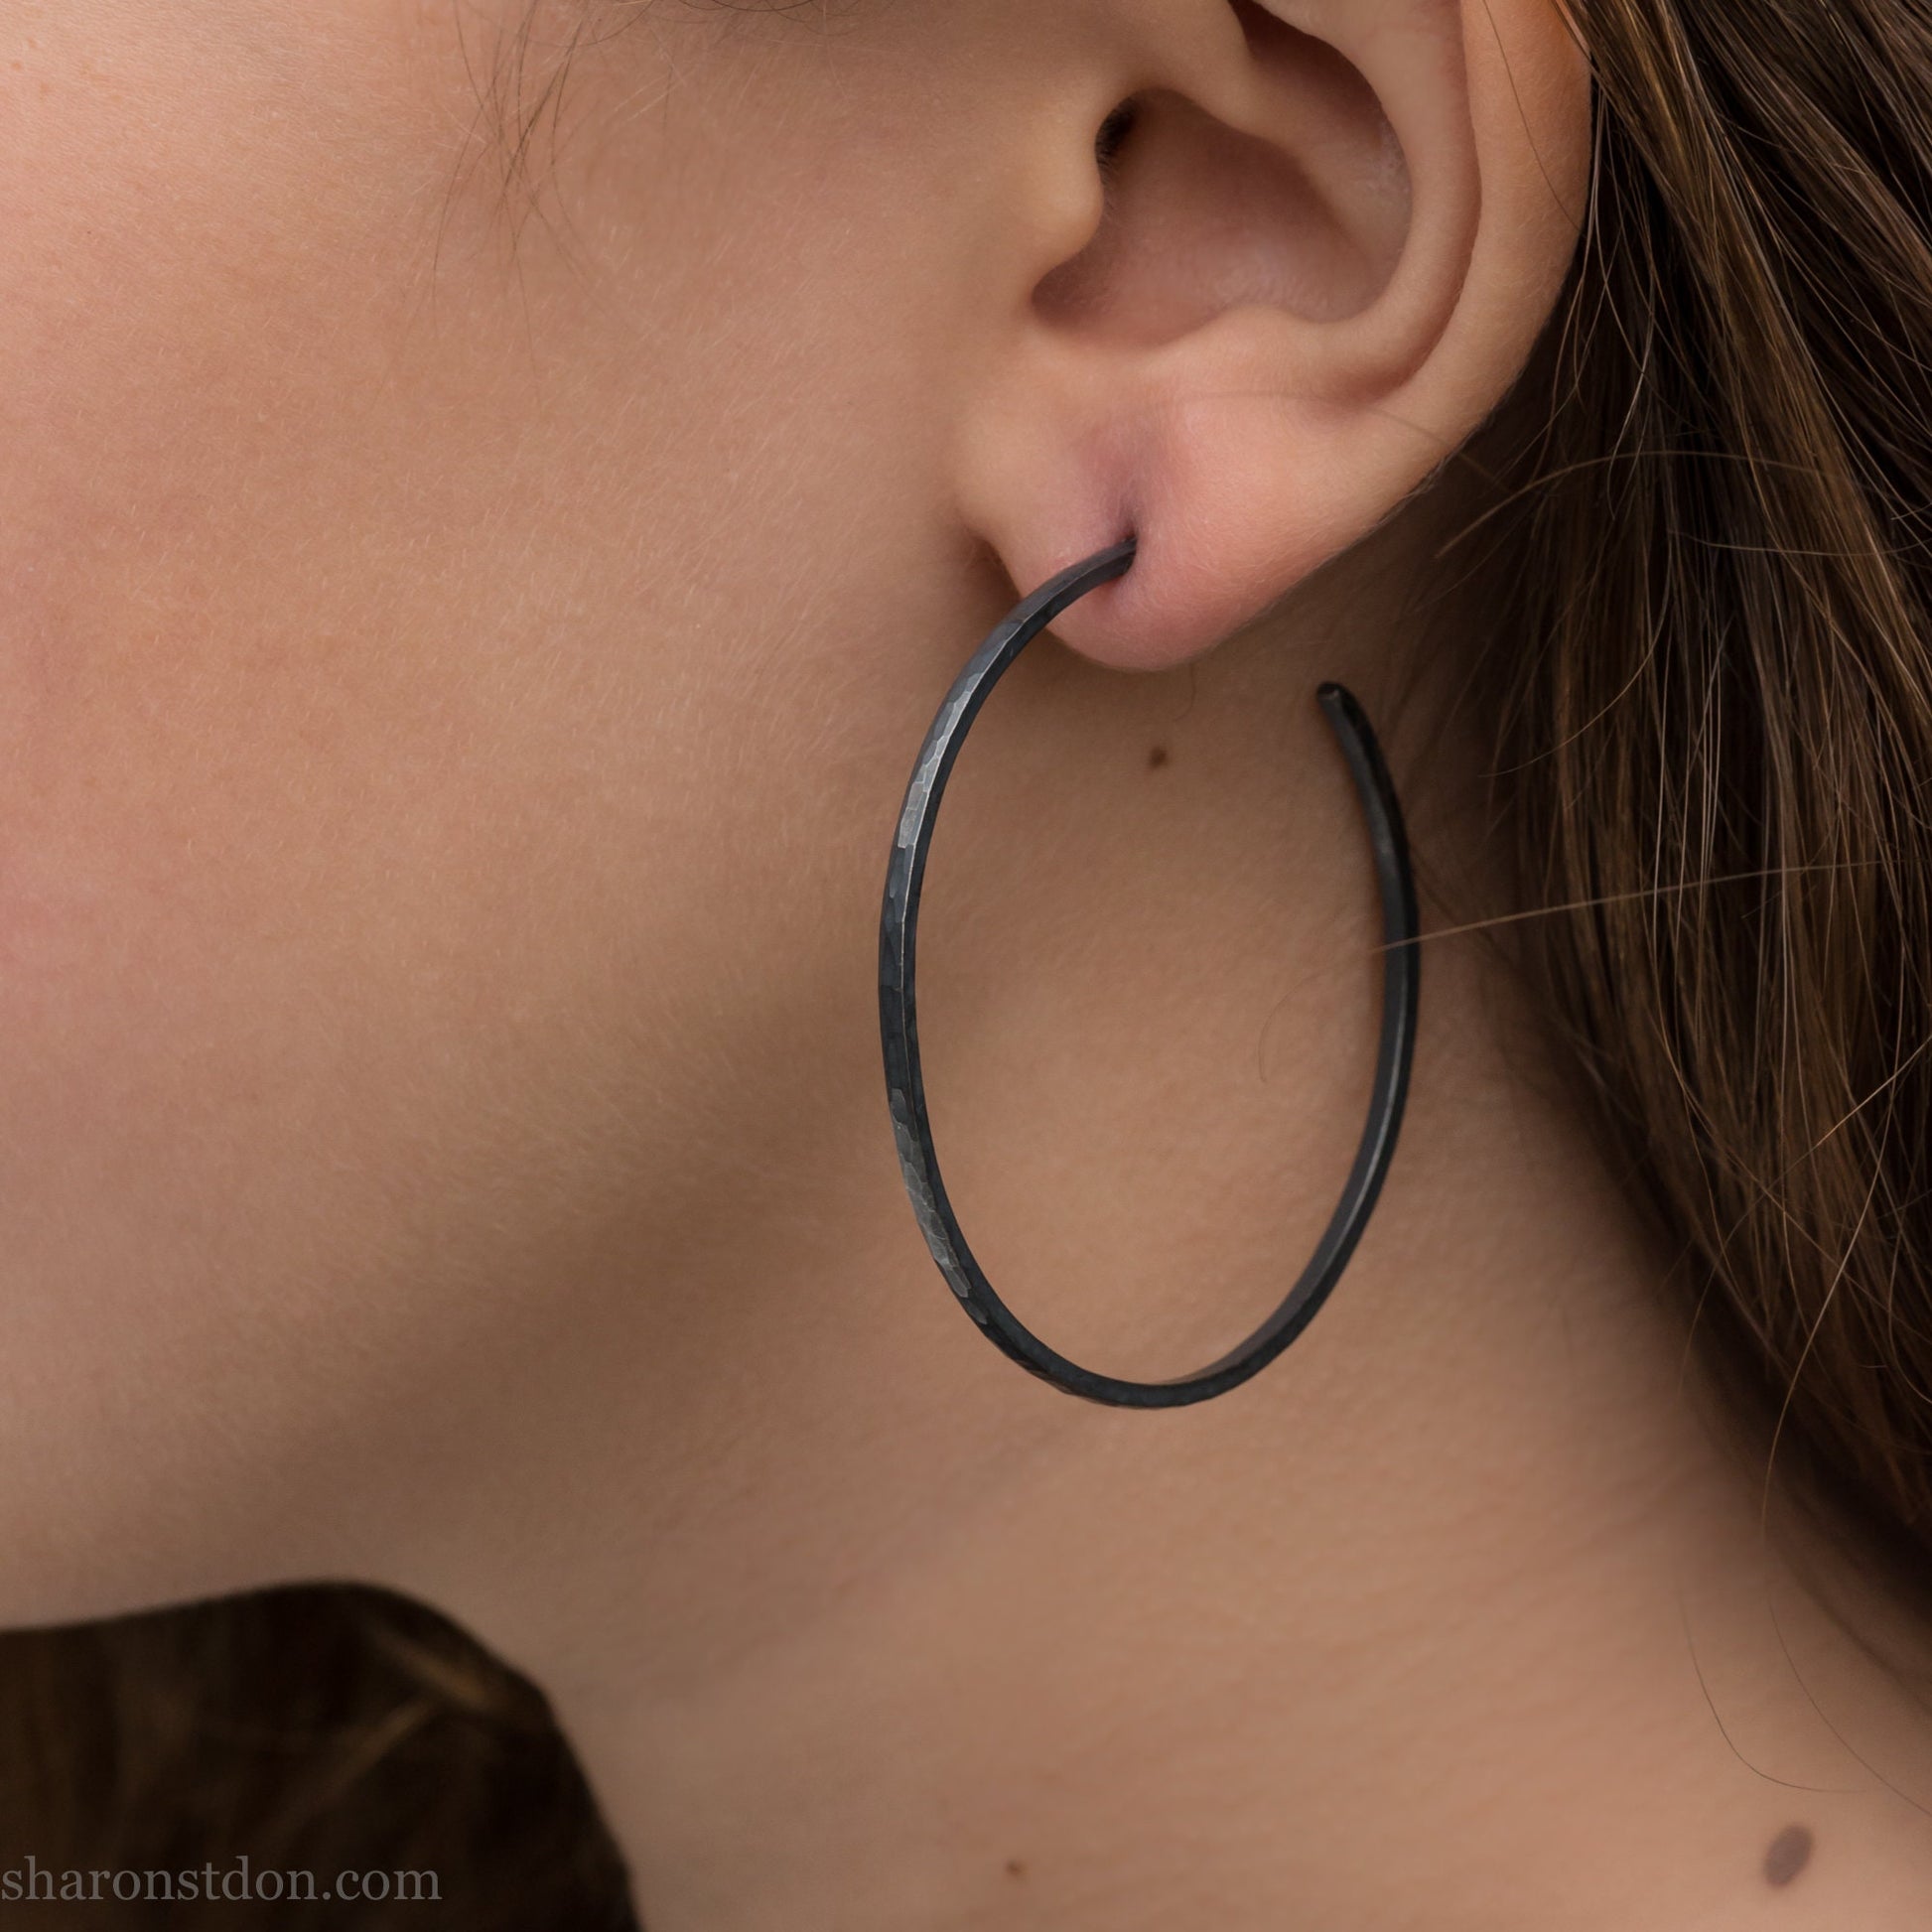 50mm x 2mm 925 sterling silver hoop earrings for women | Large, minimalist, oxidized black silver hoops | Handmade unique  gift for her